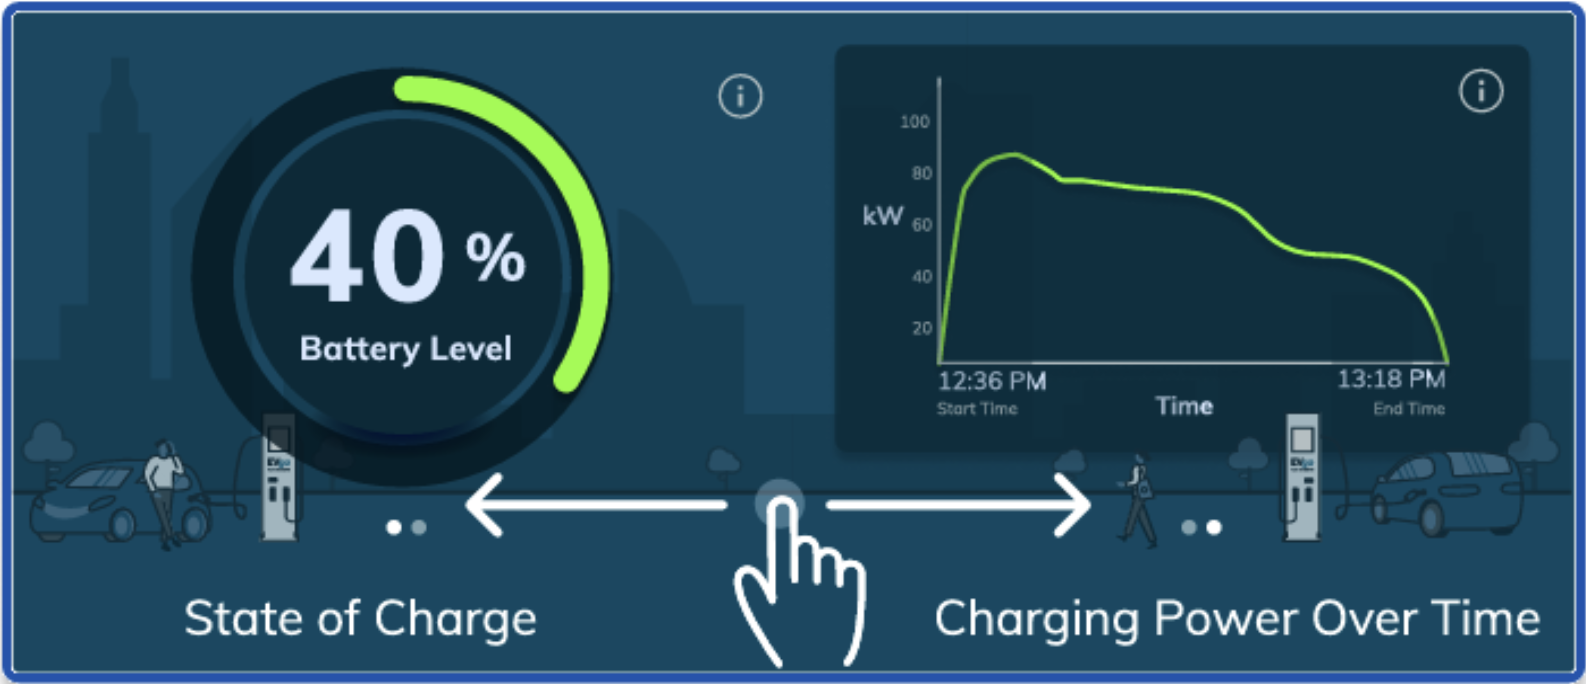 App charge monitor - charging progress.png